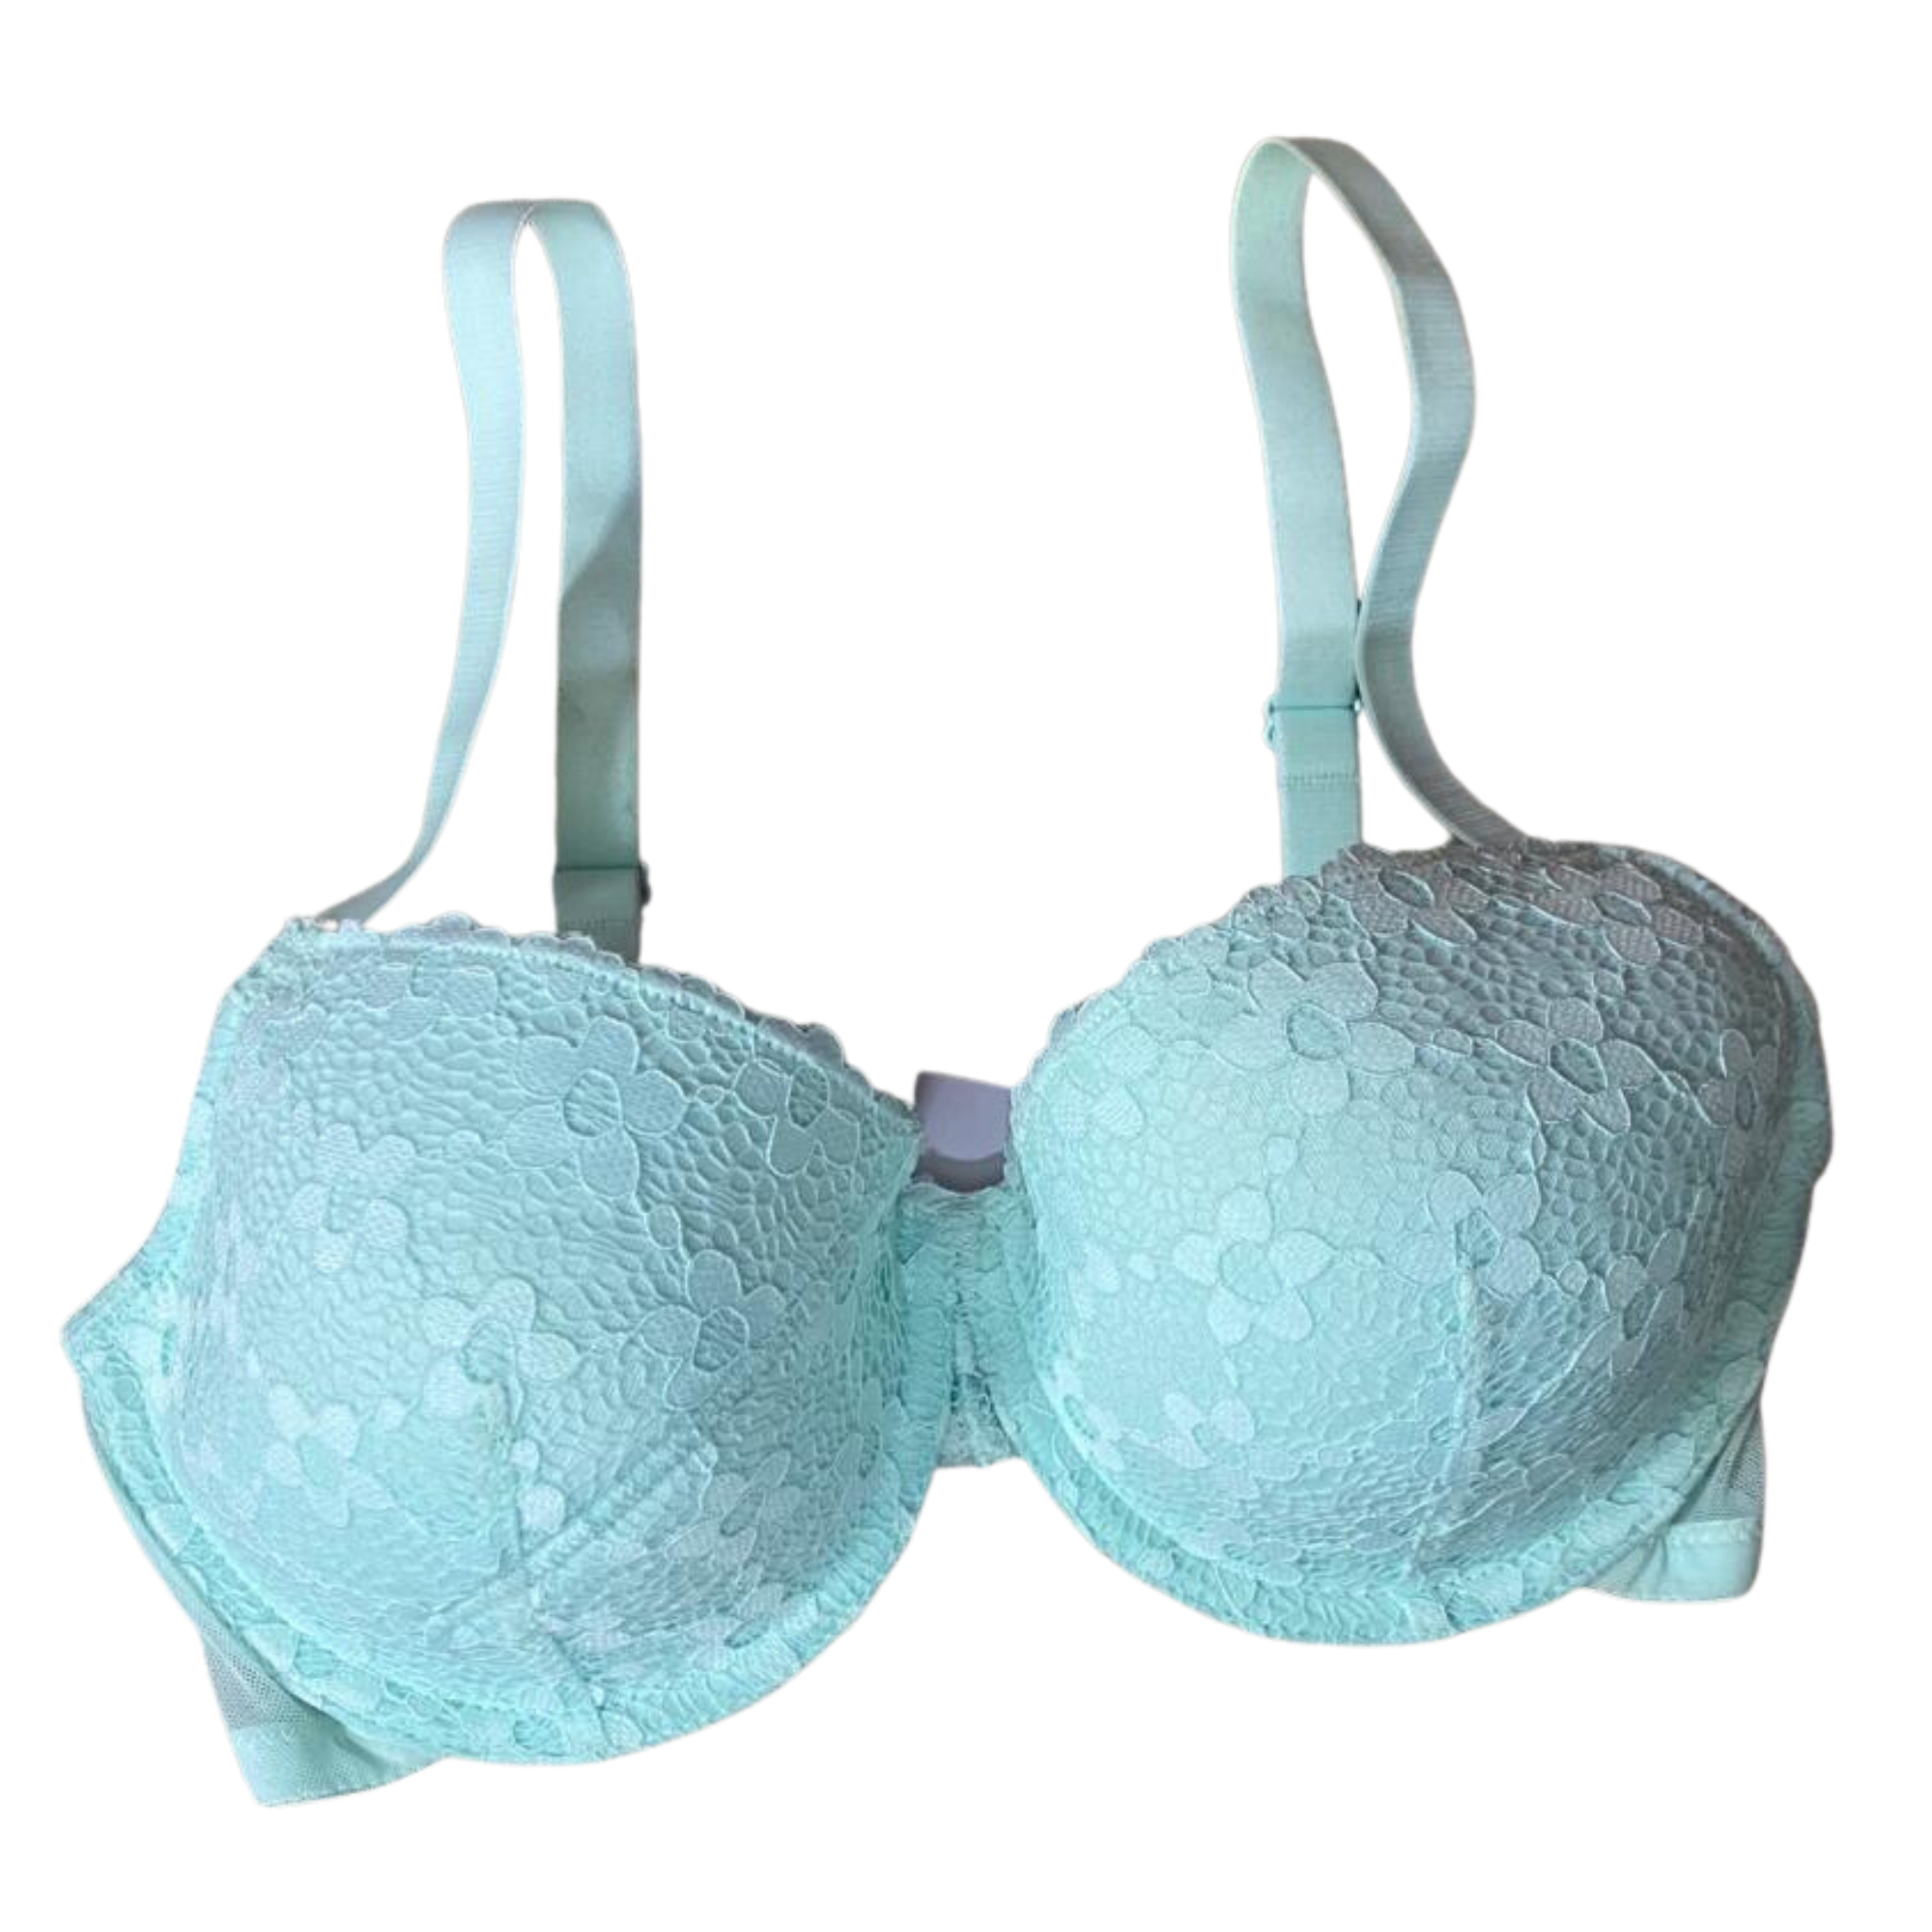 Export Quality Foam Bra for Women Body Fitting Stylish And Comfortable Foam Bra for Women - Legacy Boutiques